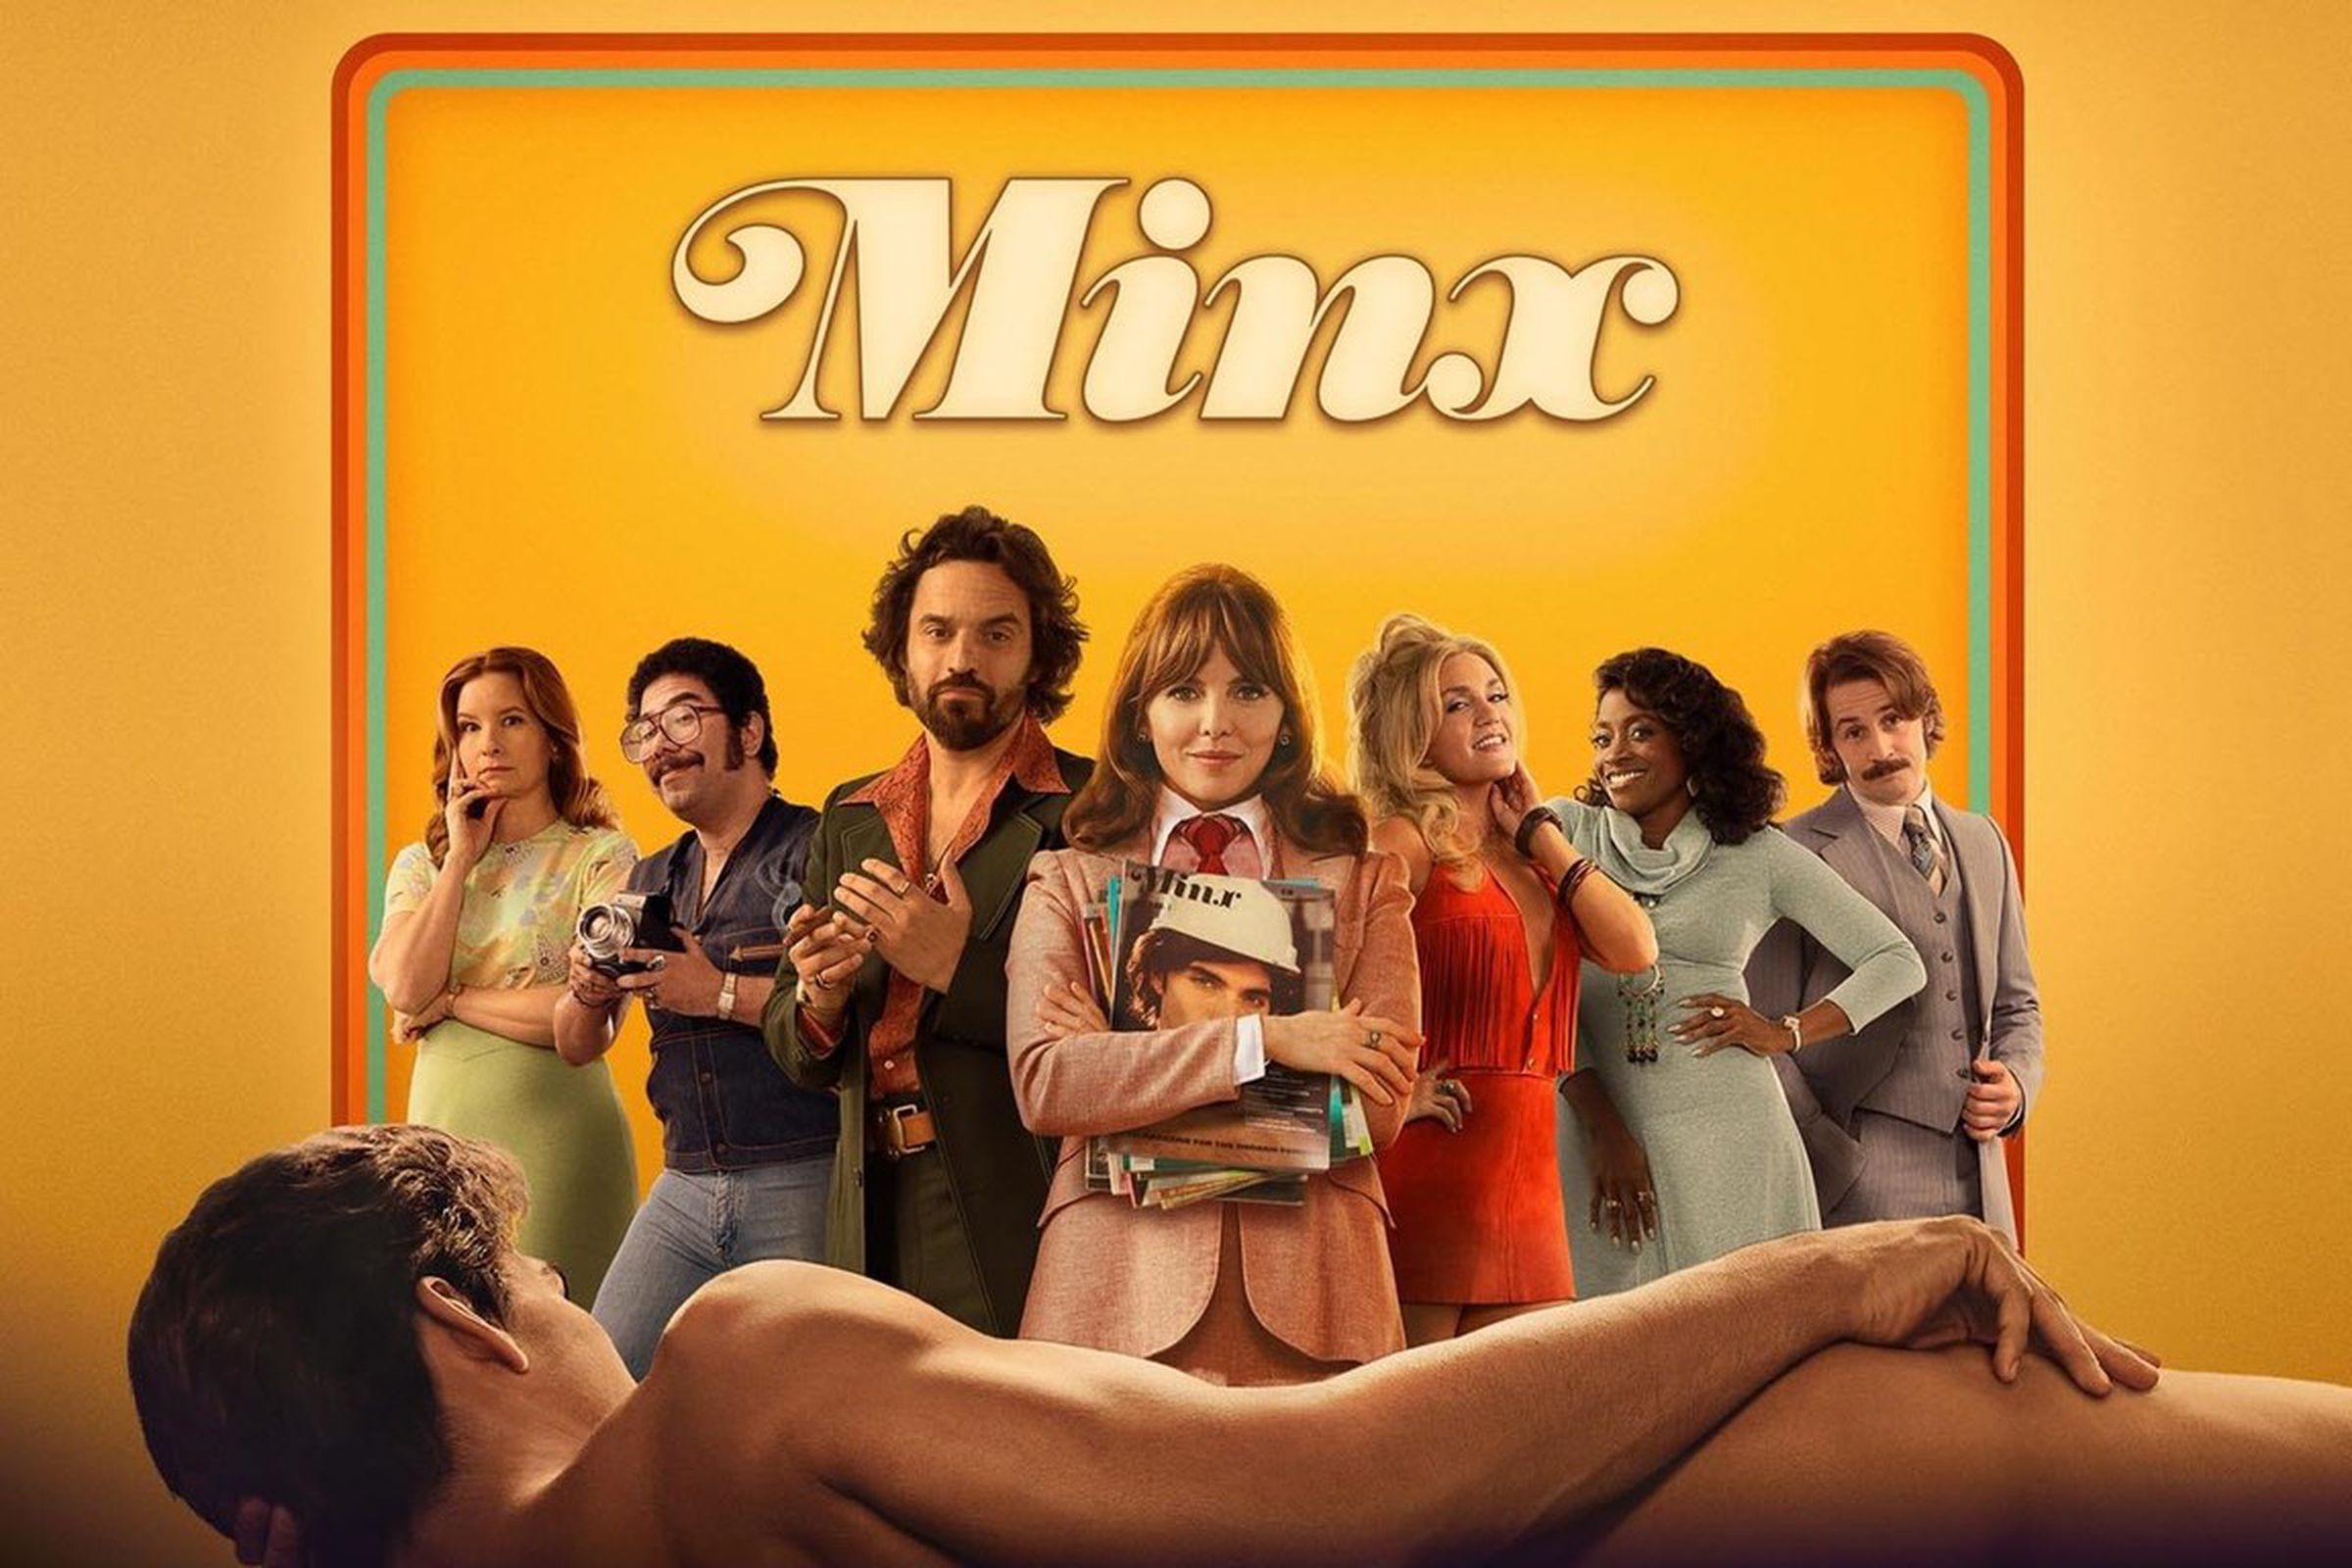 The cast of Minx is dressed in 70s attire and facing a naked man reclining on his side and visible only from the back.